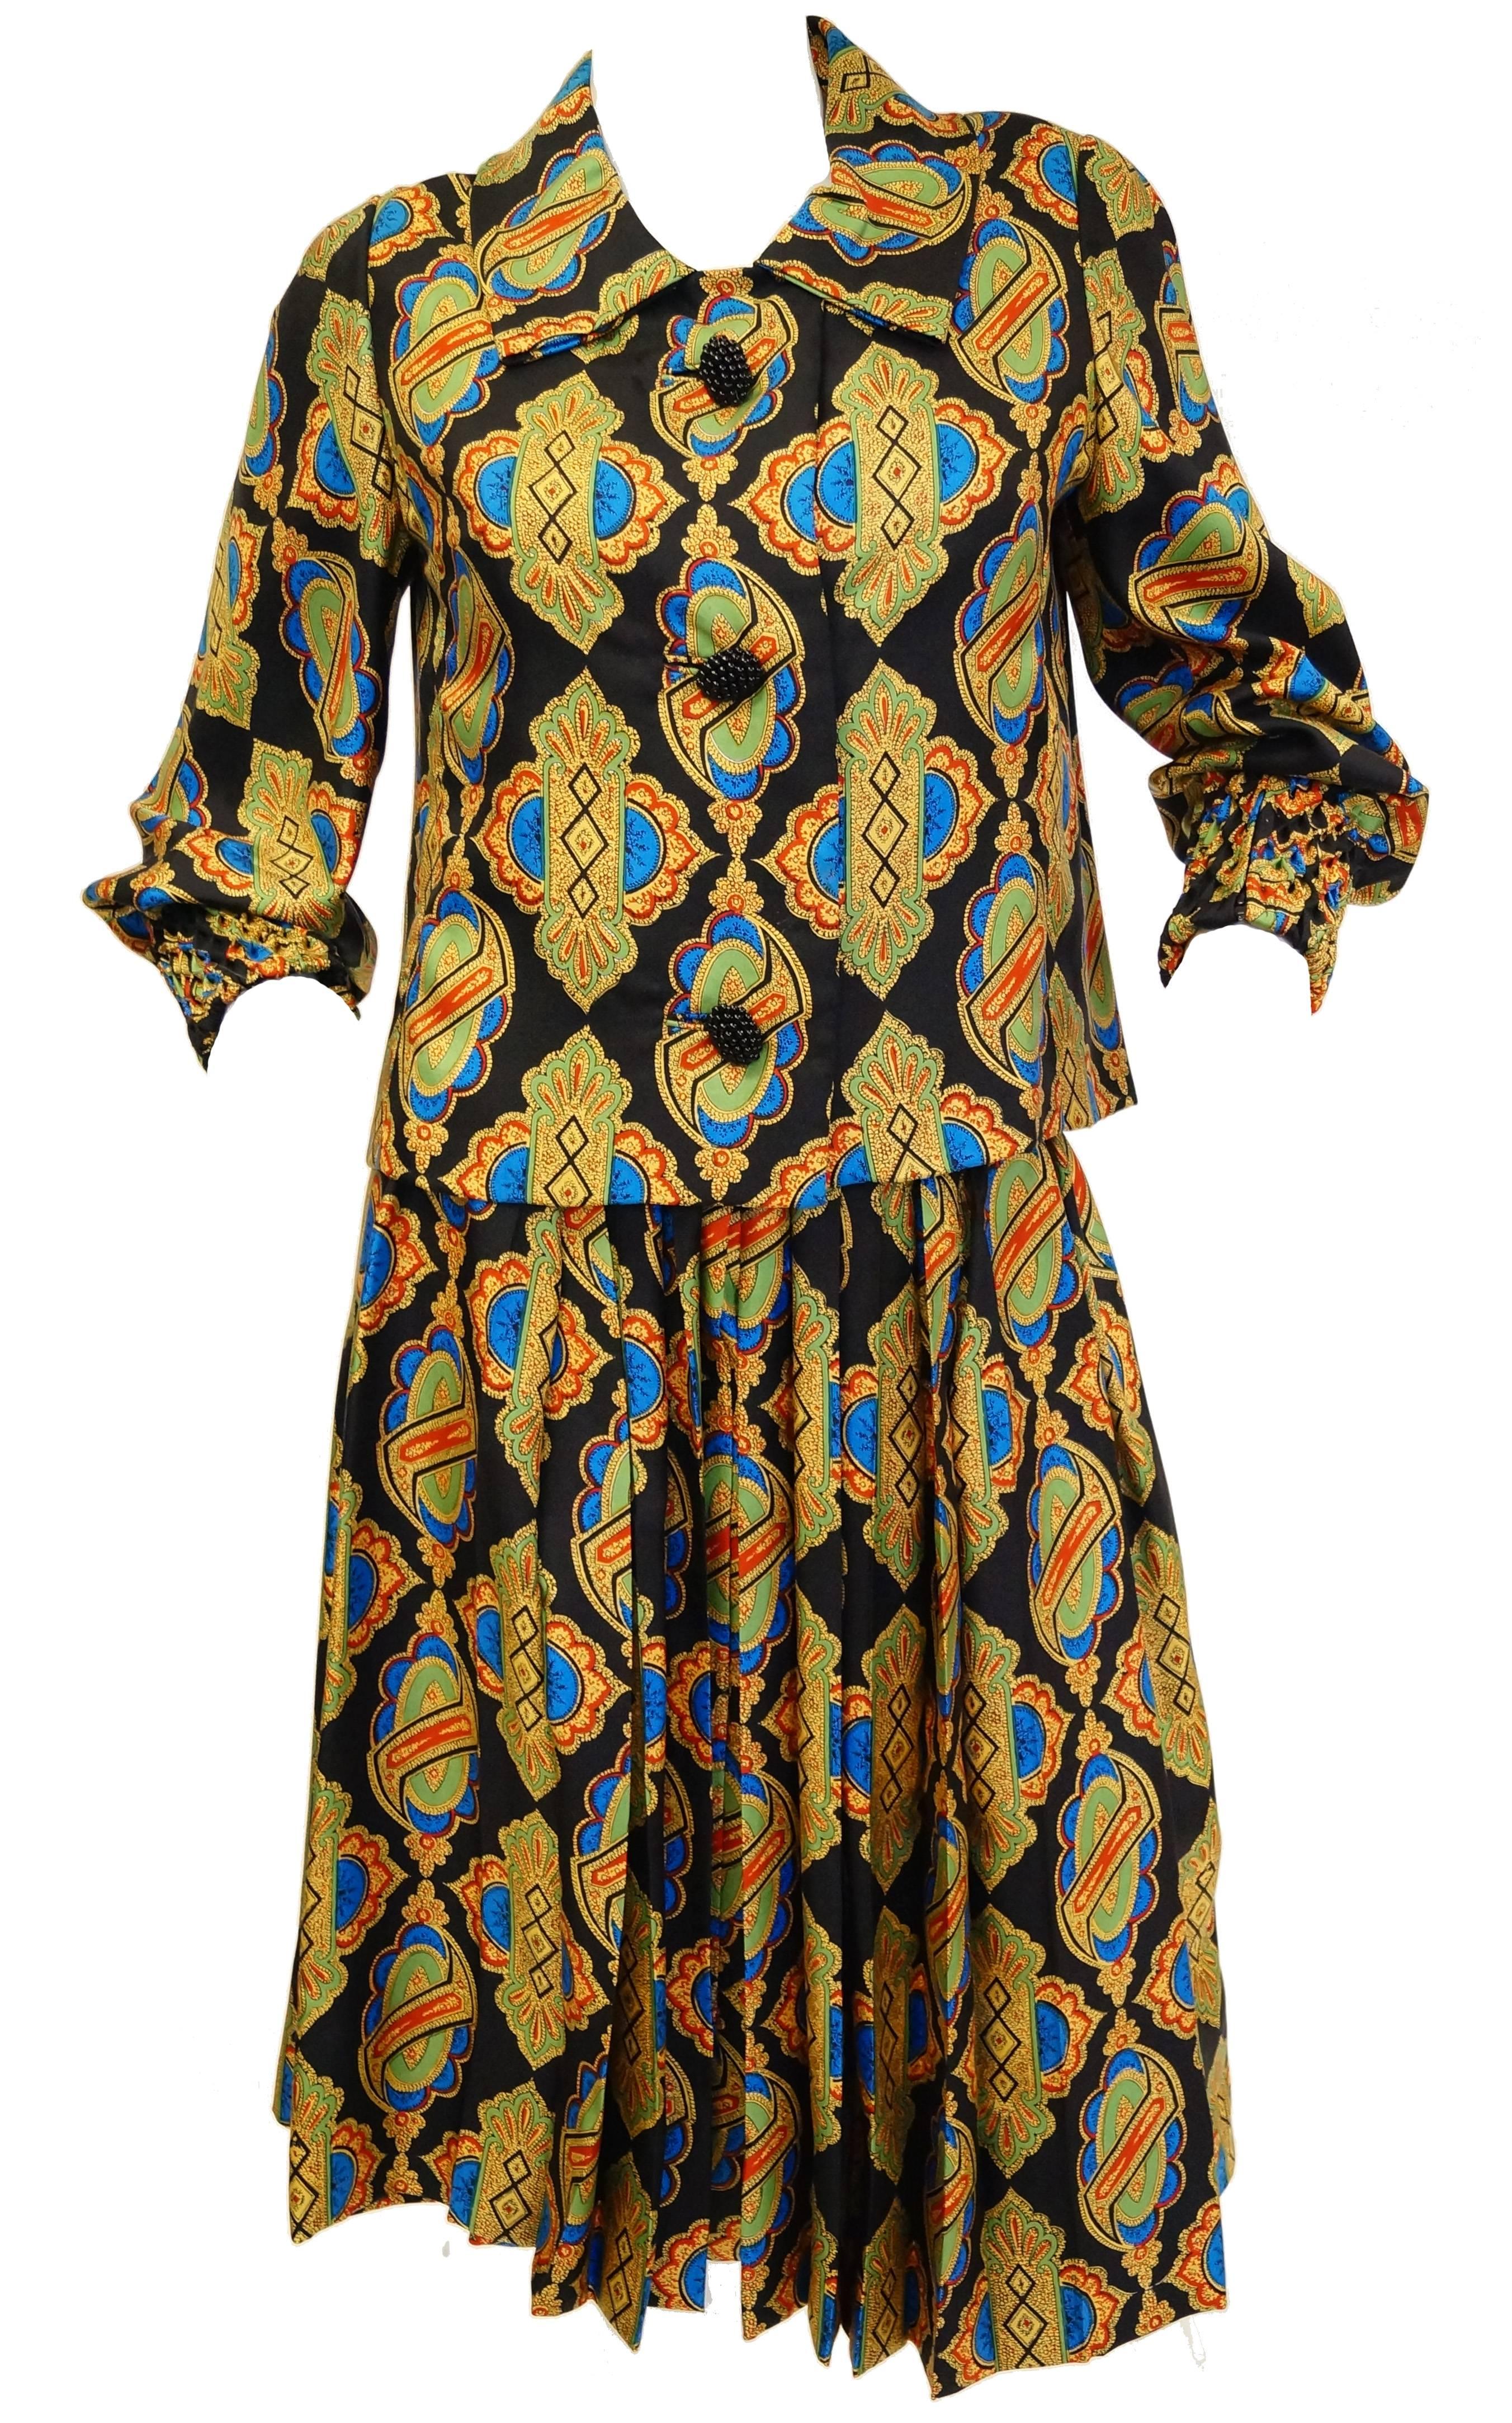 This 1970s ensemble by Galanos brings to mind the mosaic work in Venice's Palazzo Pisani-Moretta. The ensemble features ornate blue, gold, orange, and mint griccia print floral - like shapes on a black background. The silk ensemble is composed of an